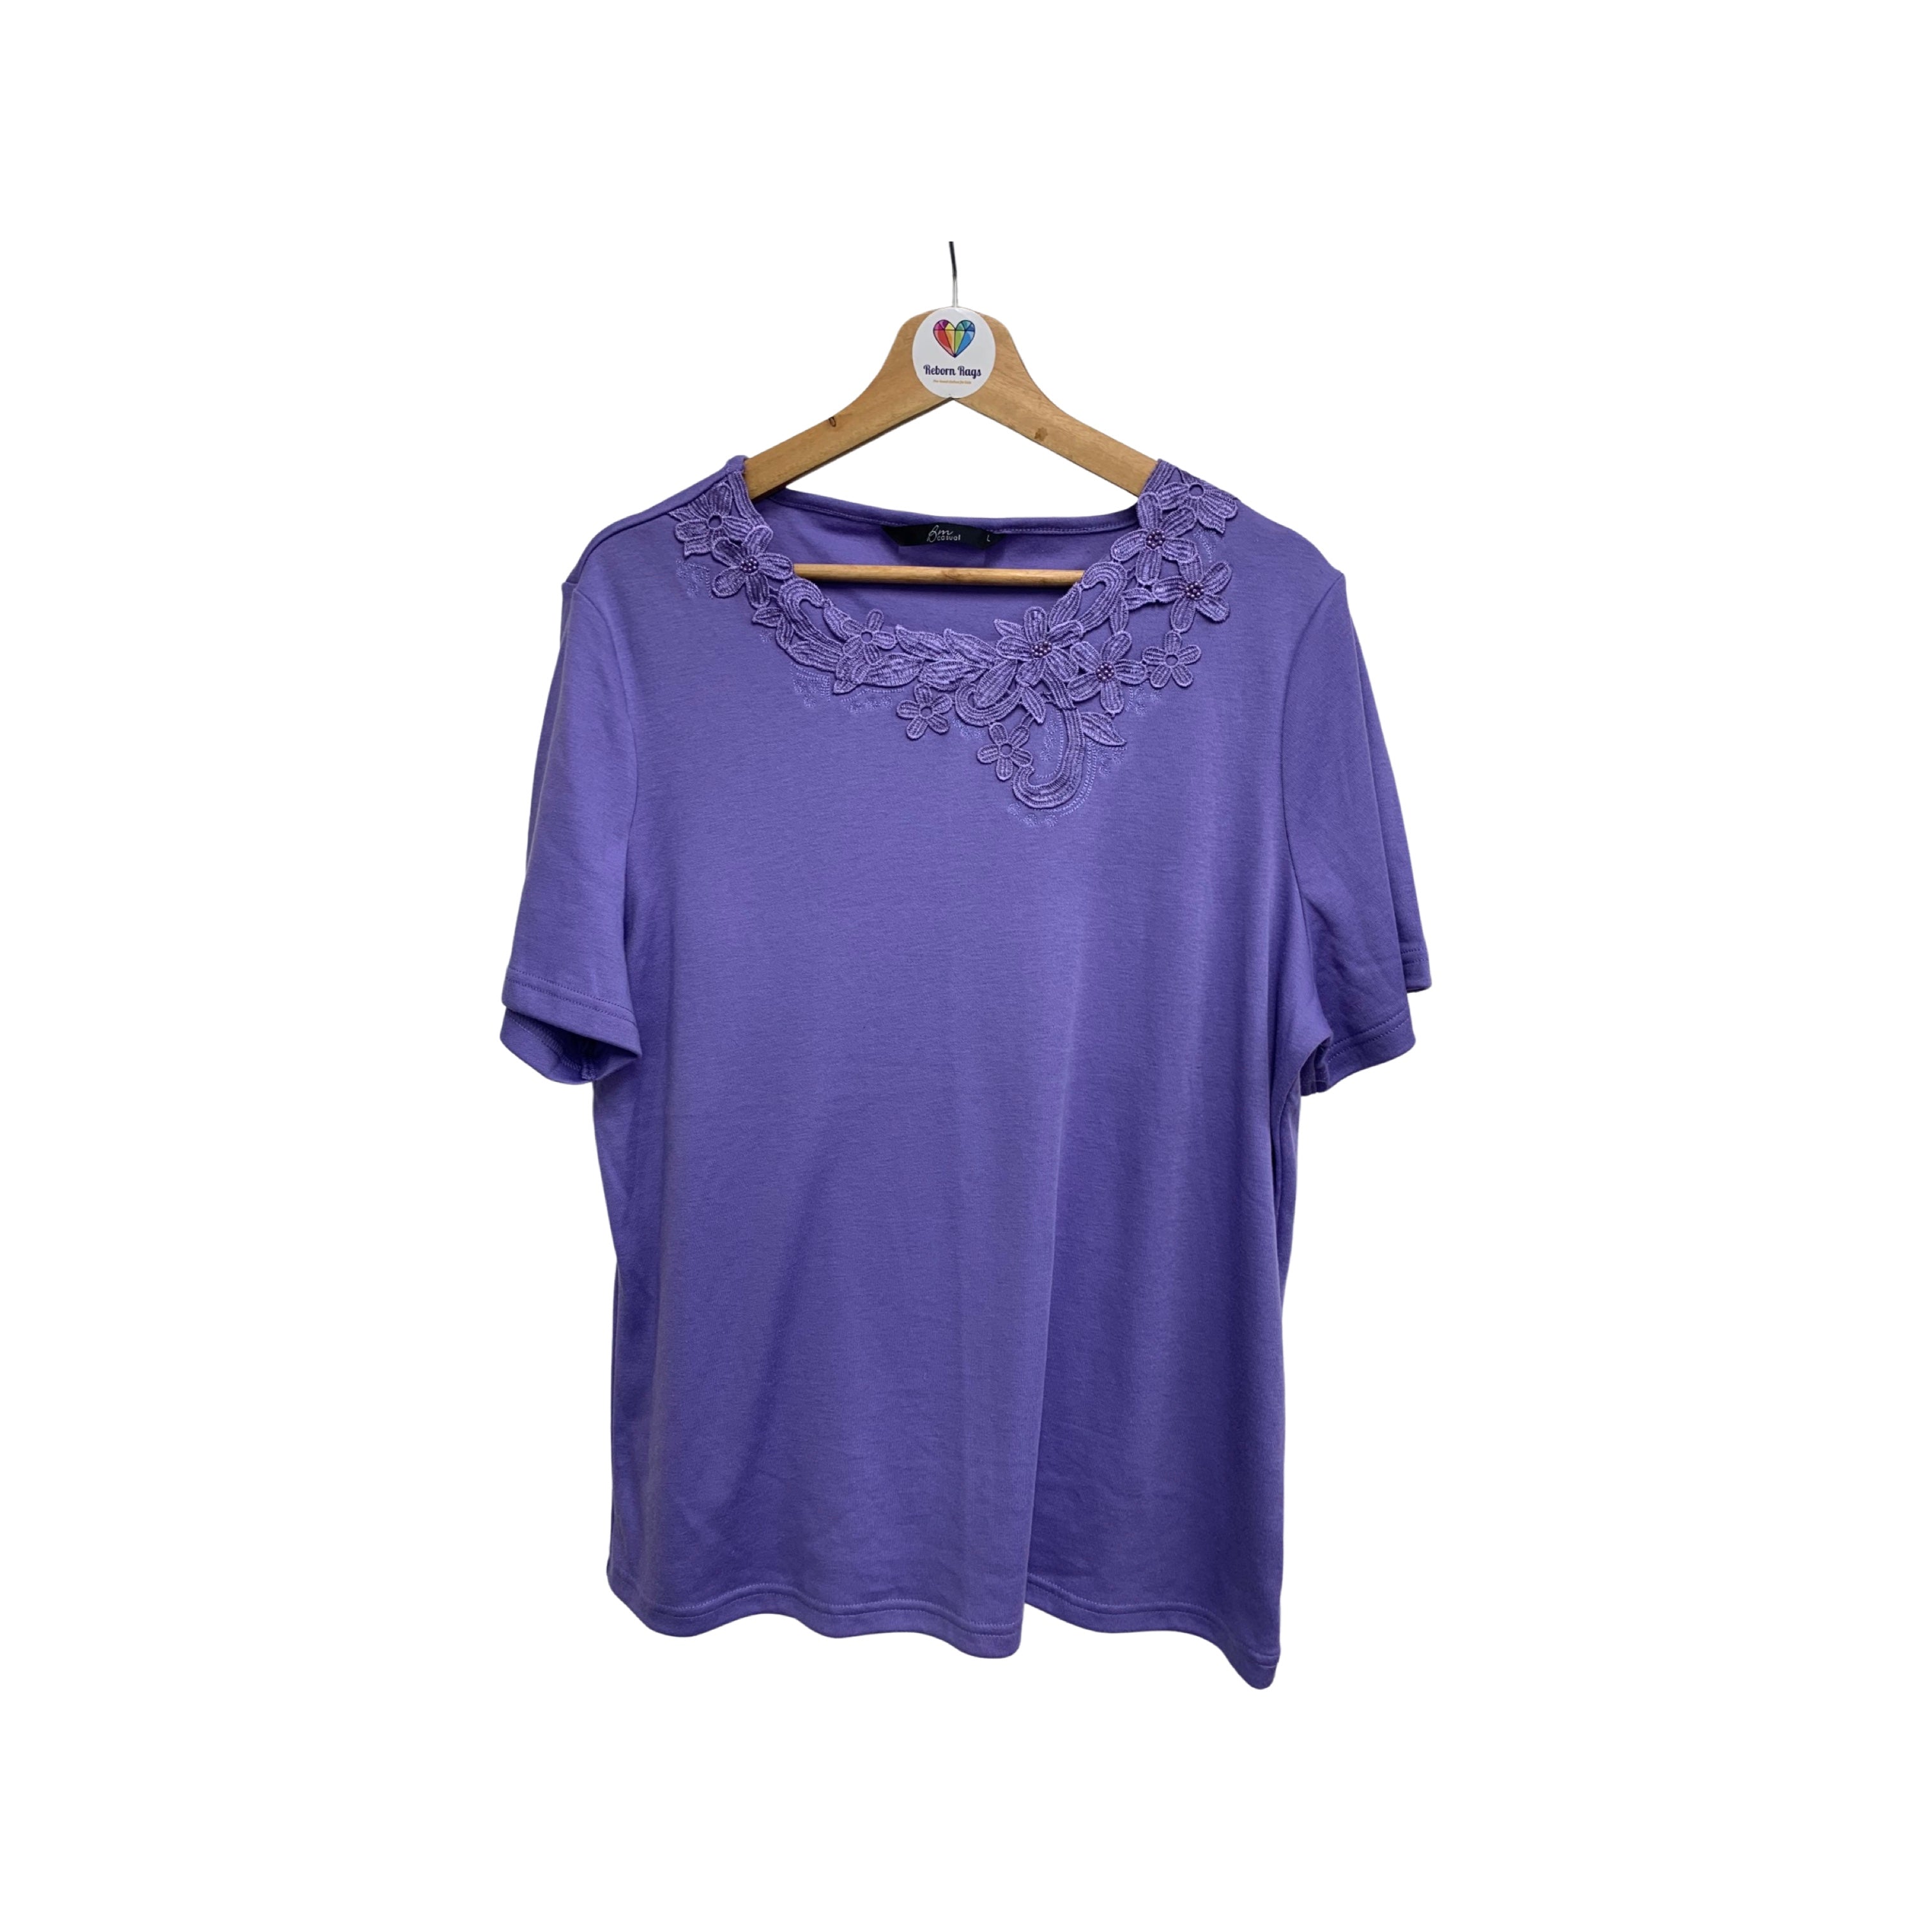 BM Casual Embroidered T Shirt Size L (12-14)